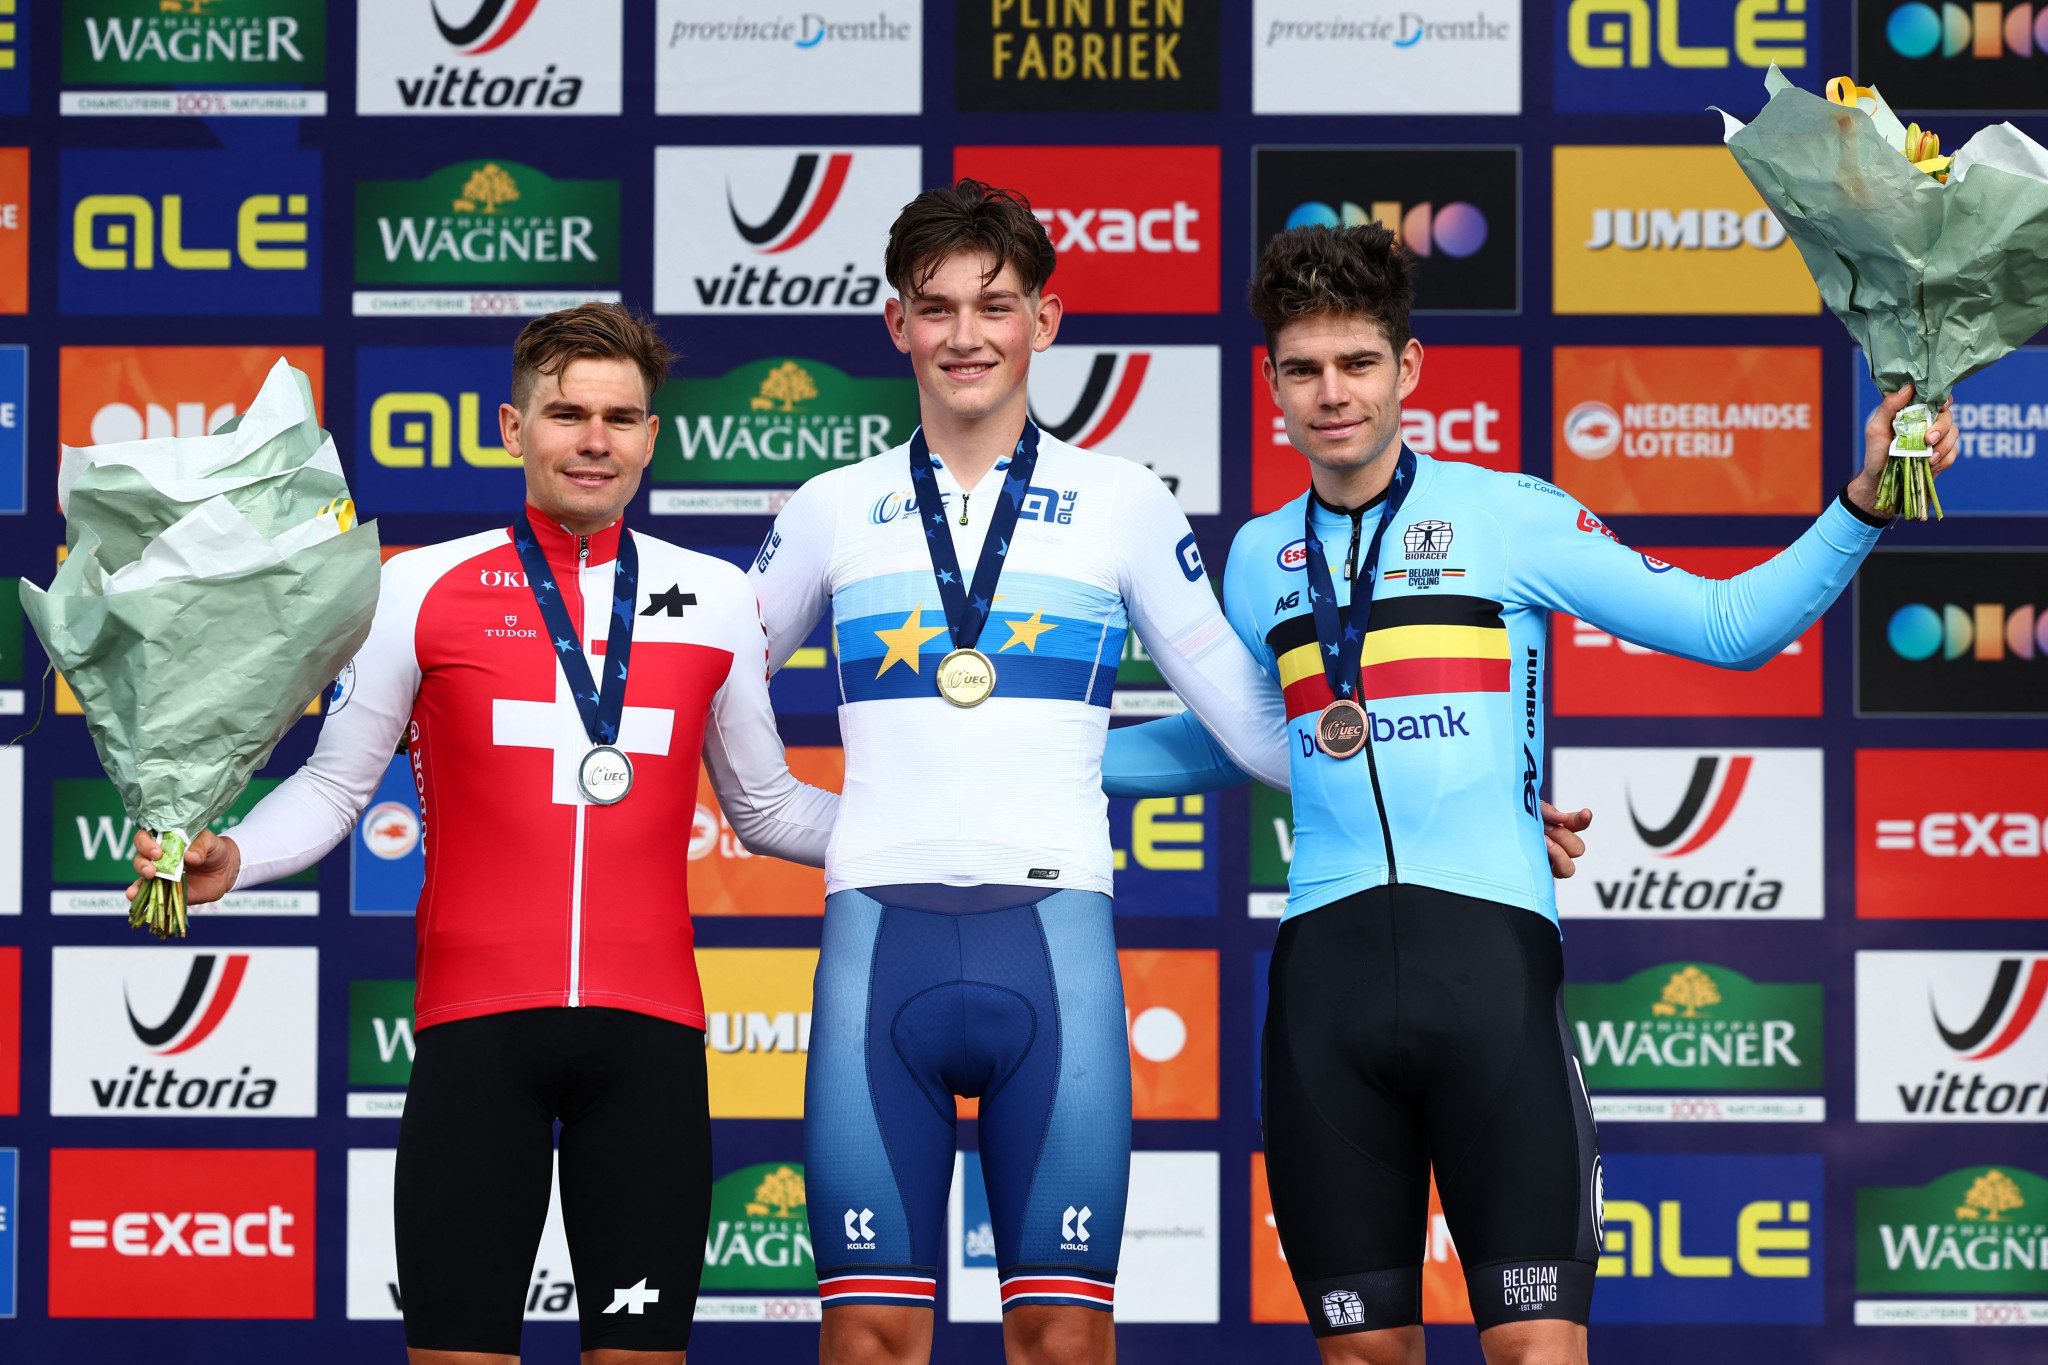 Britain's Josh Tarling, centre, impressively beat Switzerland's Stefan Bissegger, left, and Belgium's Wout van Aert, right, in the elite men's time trial ©Getty Images